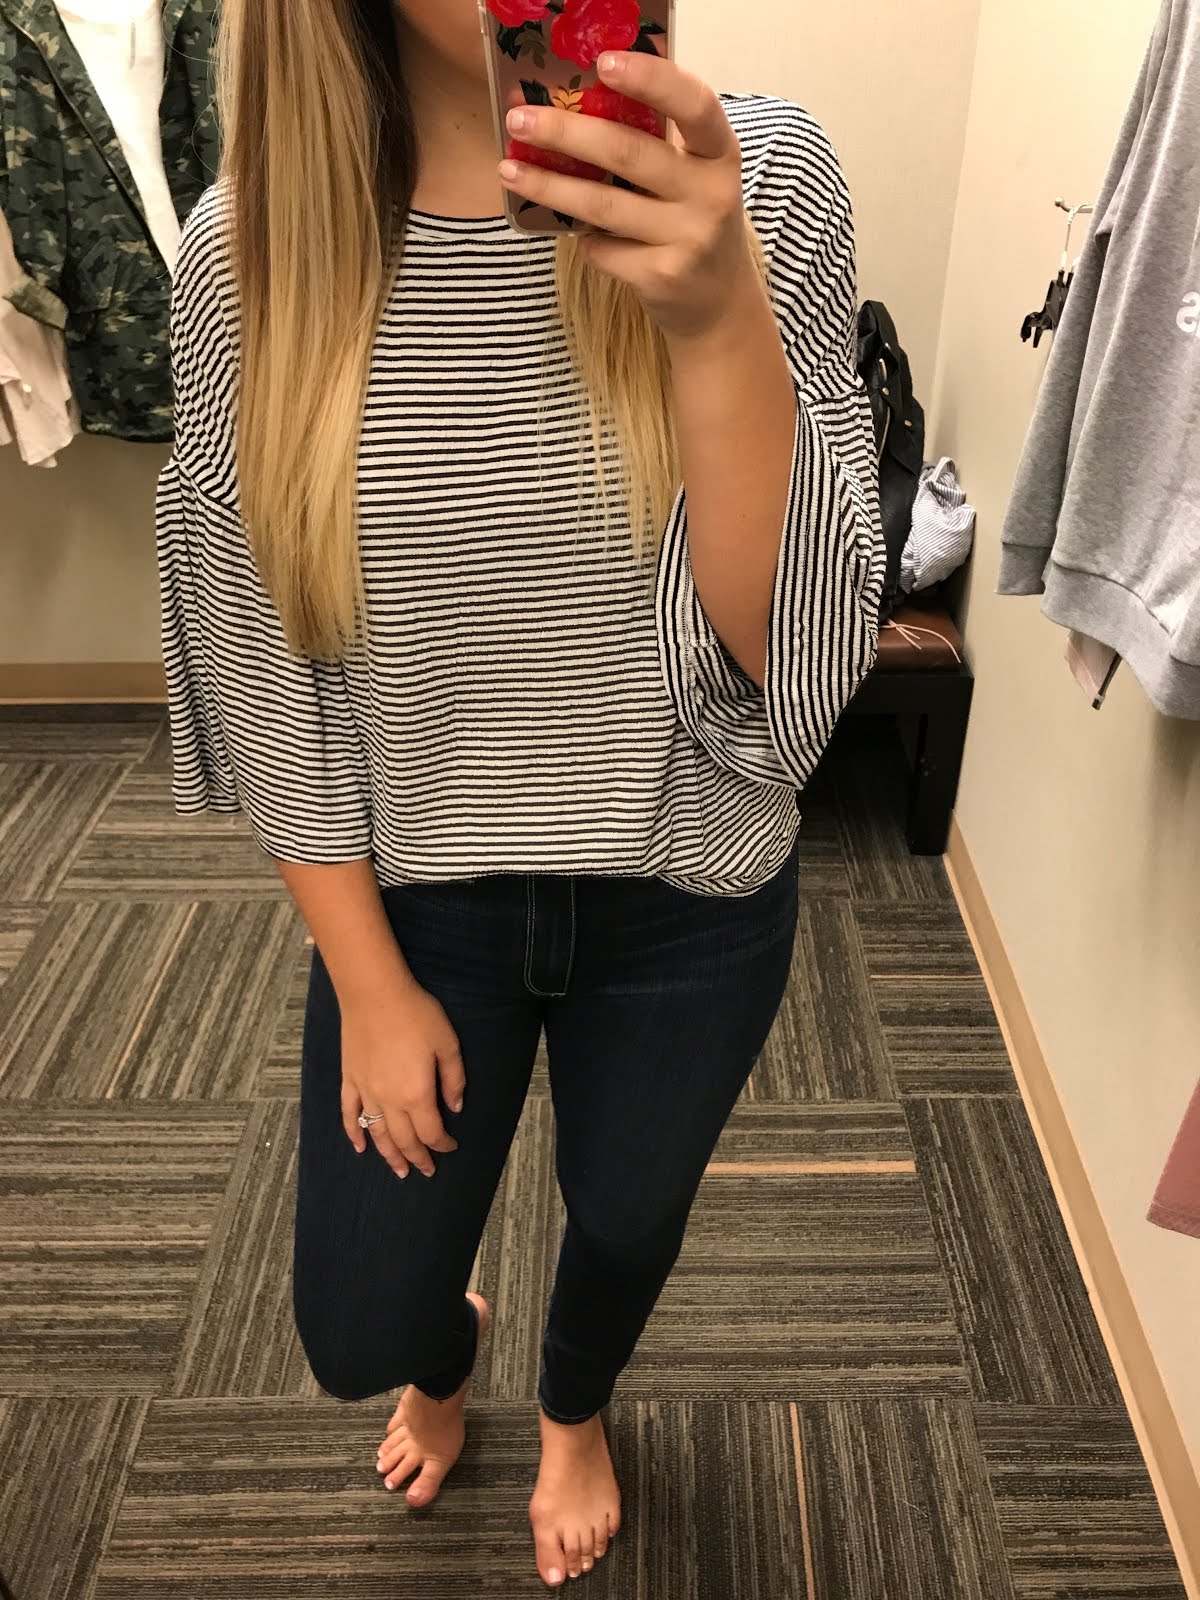 Nordstrom Anniversary Sale: Fitting Room Diaries